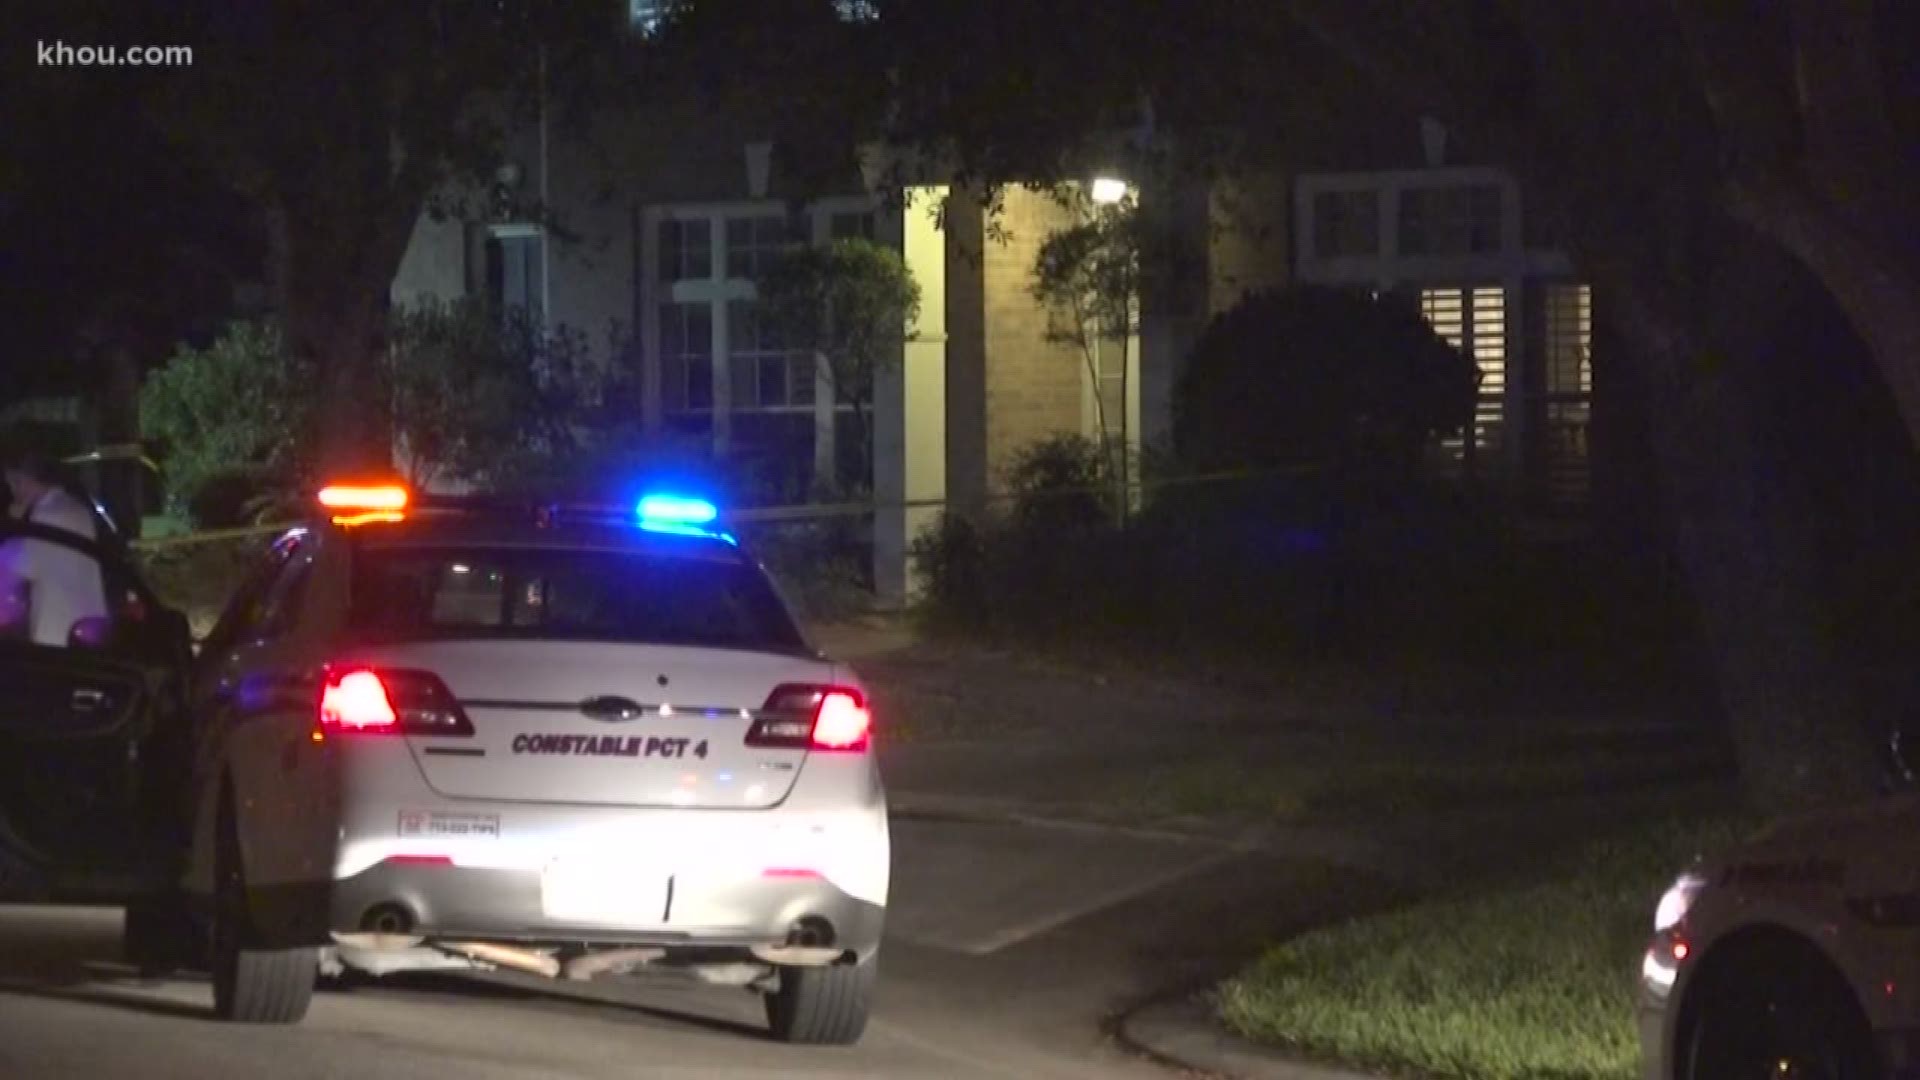 A man who was showing off a handgun to his friends apparently didn't realize it was loaded and accidentally shot and killed himself overnight. Deputies say the man was showing it off during a barbecue at a home in northwest Harris County. No one else was hurt.